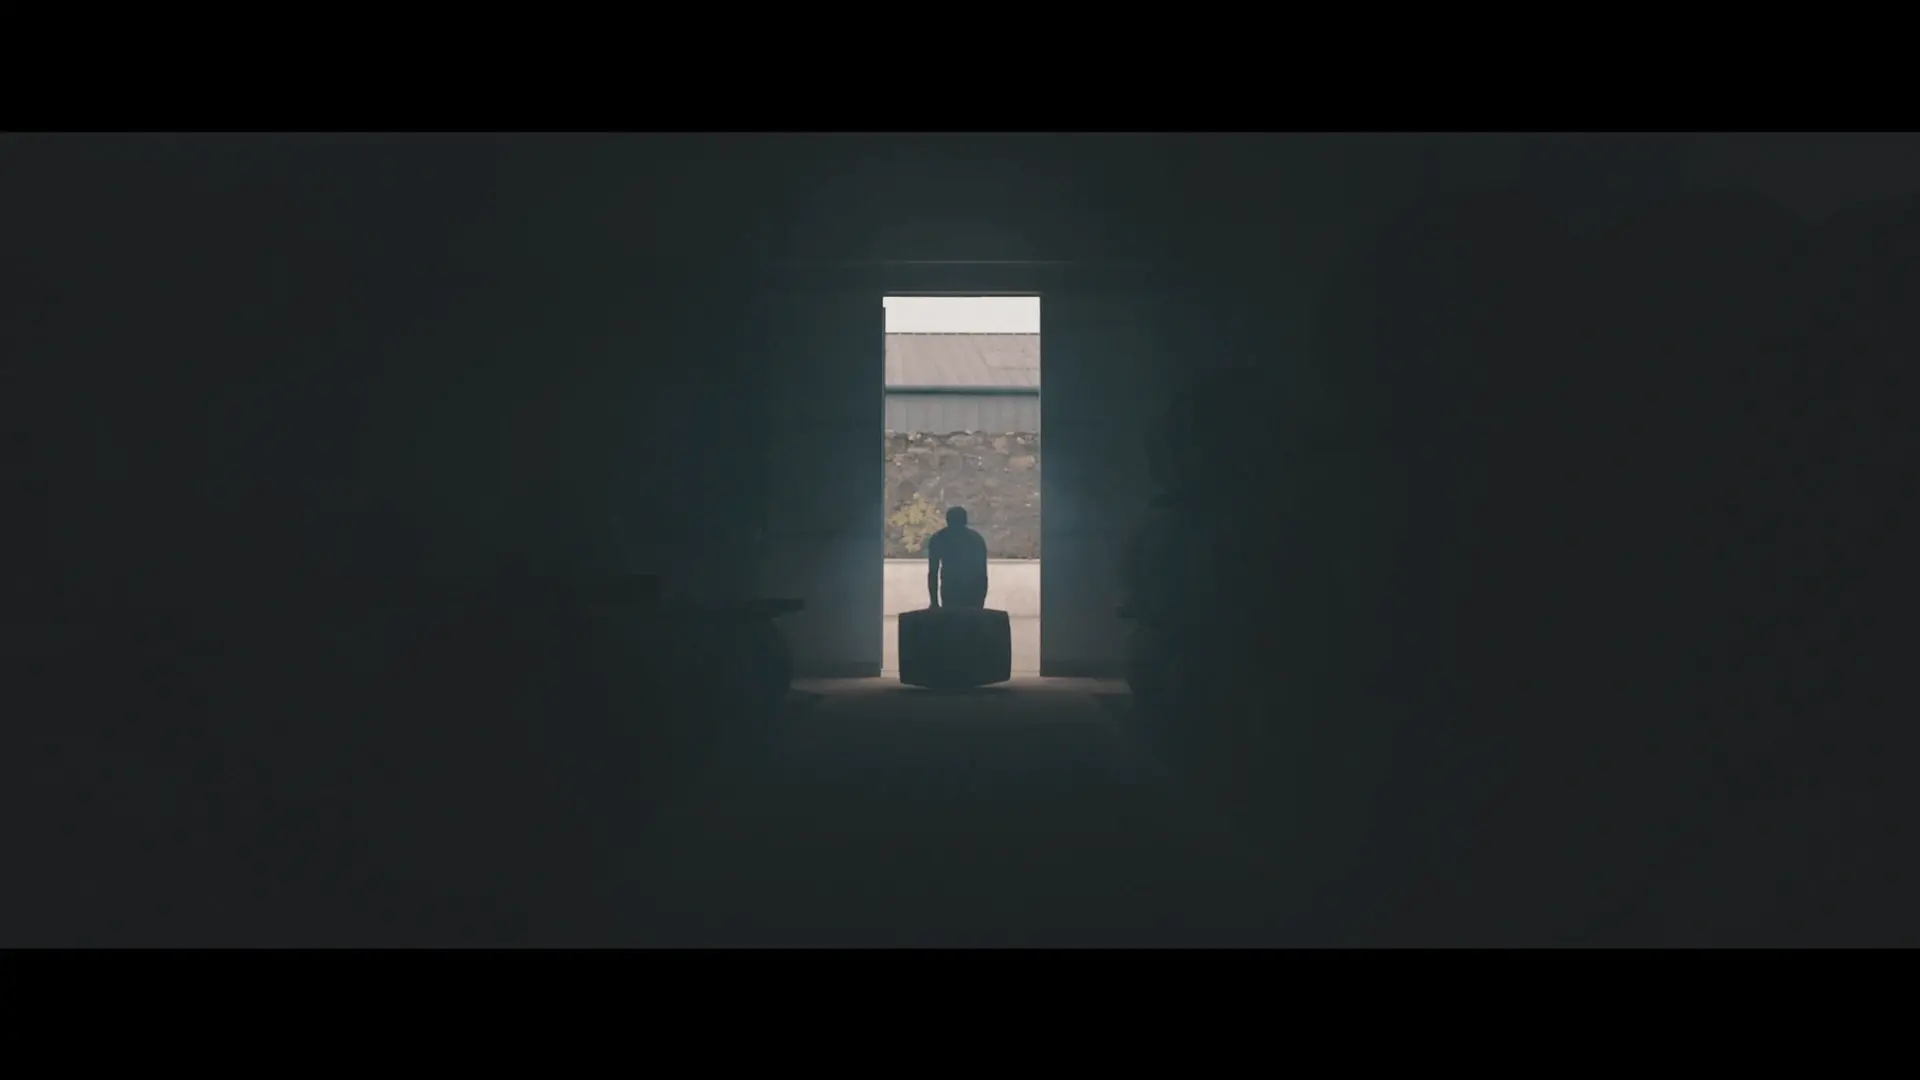 A scene from the 'KILCHOMAN: 100% ISLAY FROM BARLEY TO BOTTLE' film, with cinematography by Paolo Bischi. The image shows the silhouette of a man illuminated by light through an open door as he rolls a whiskey barrel into the distillery.